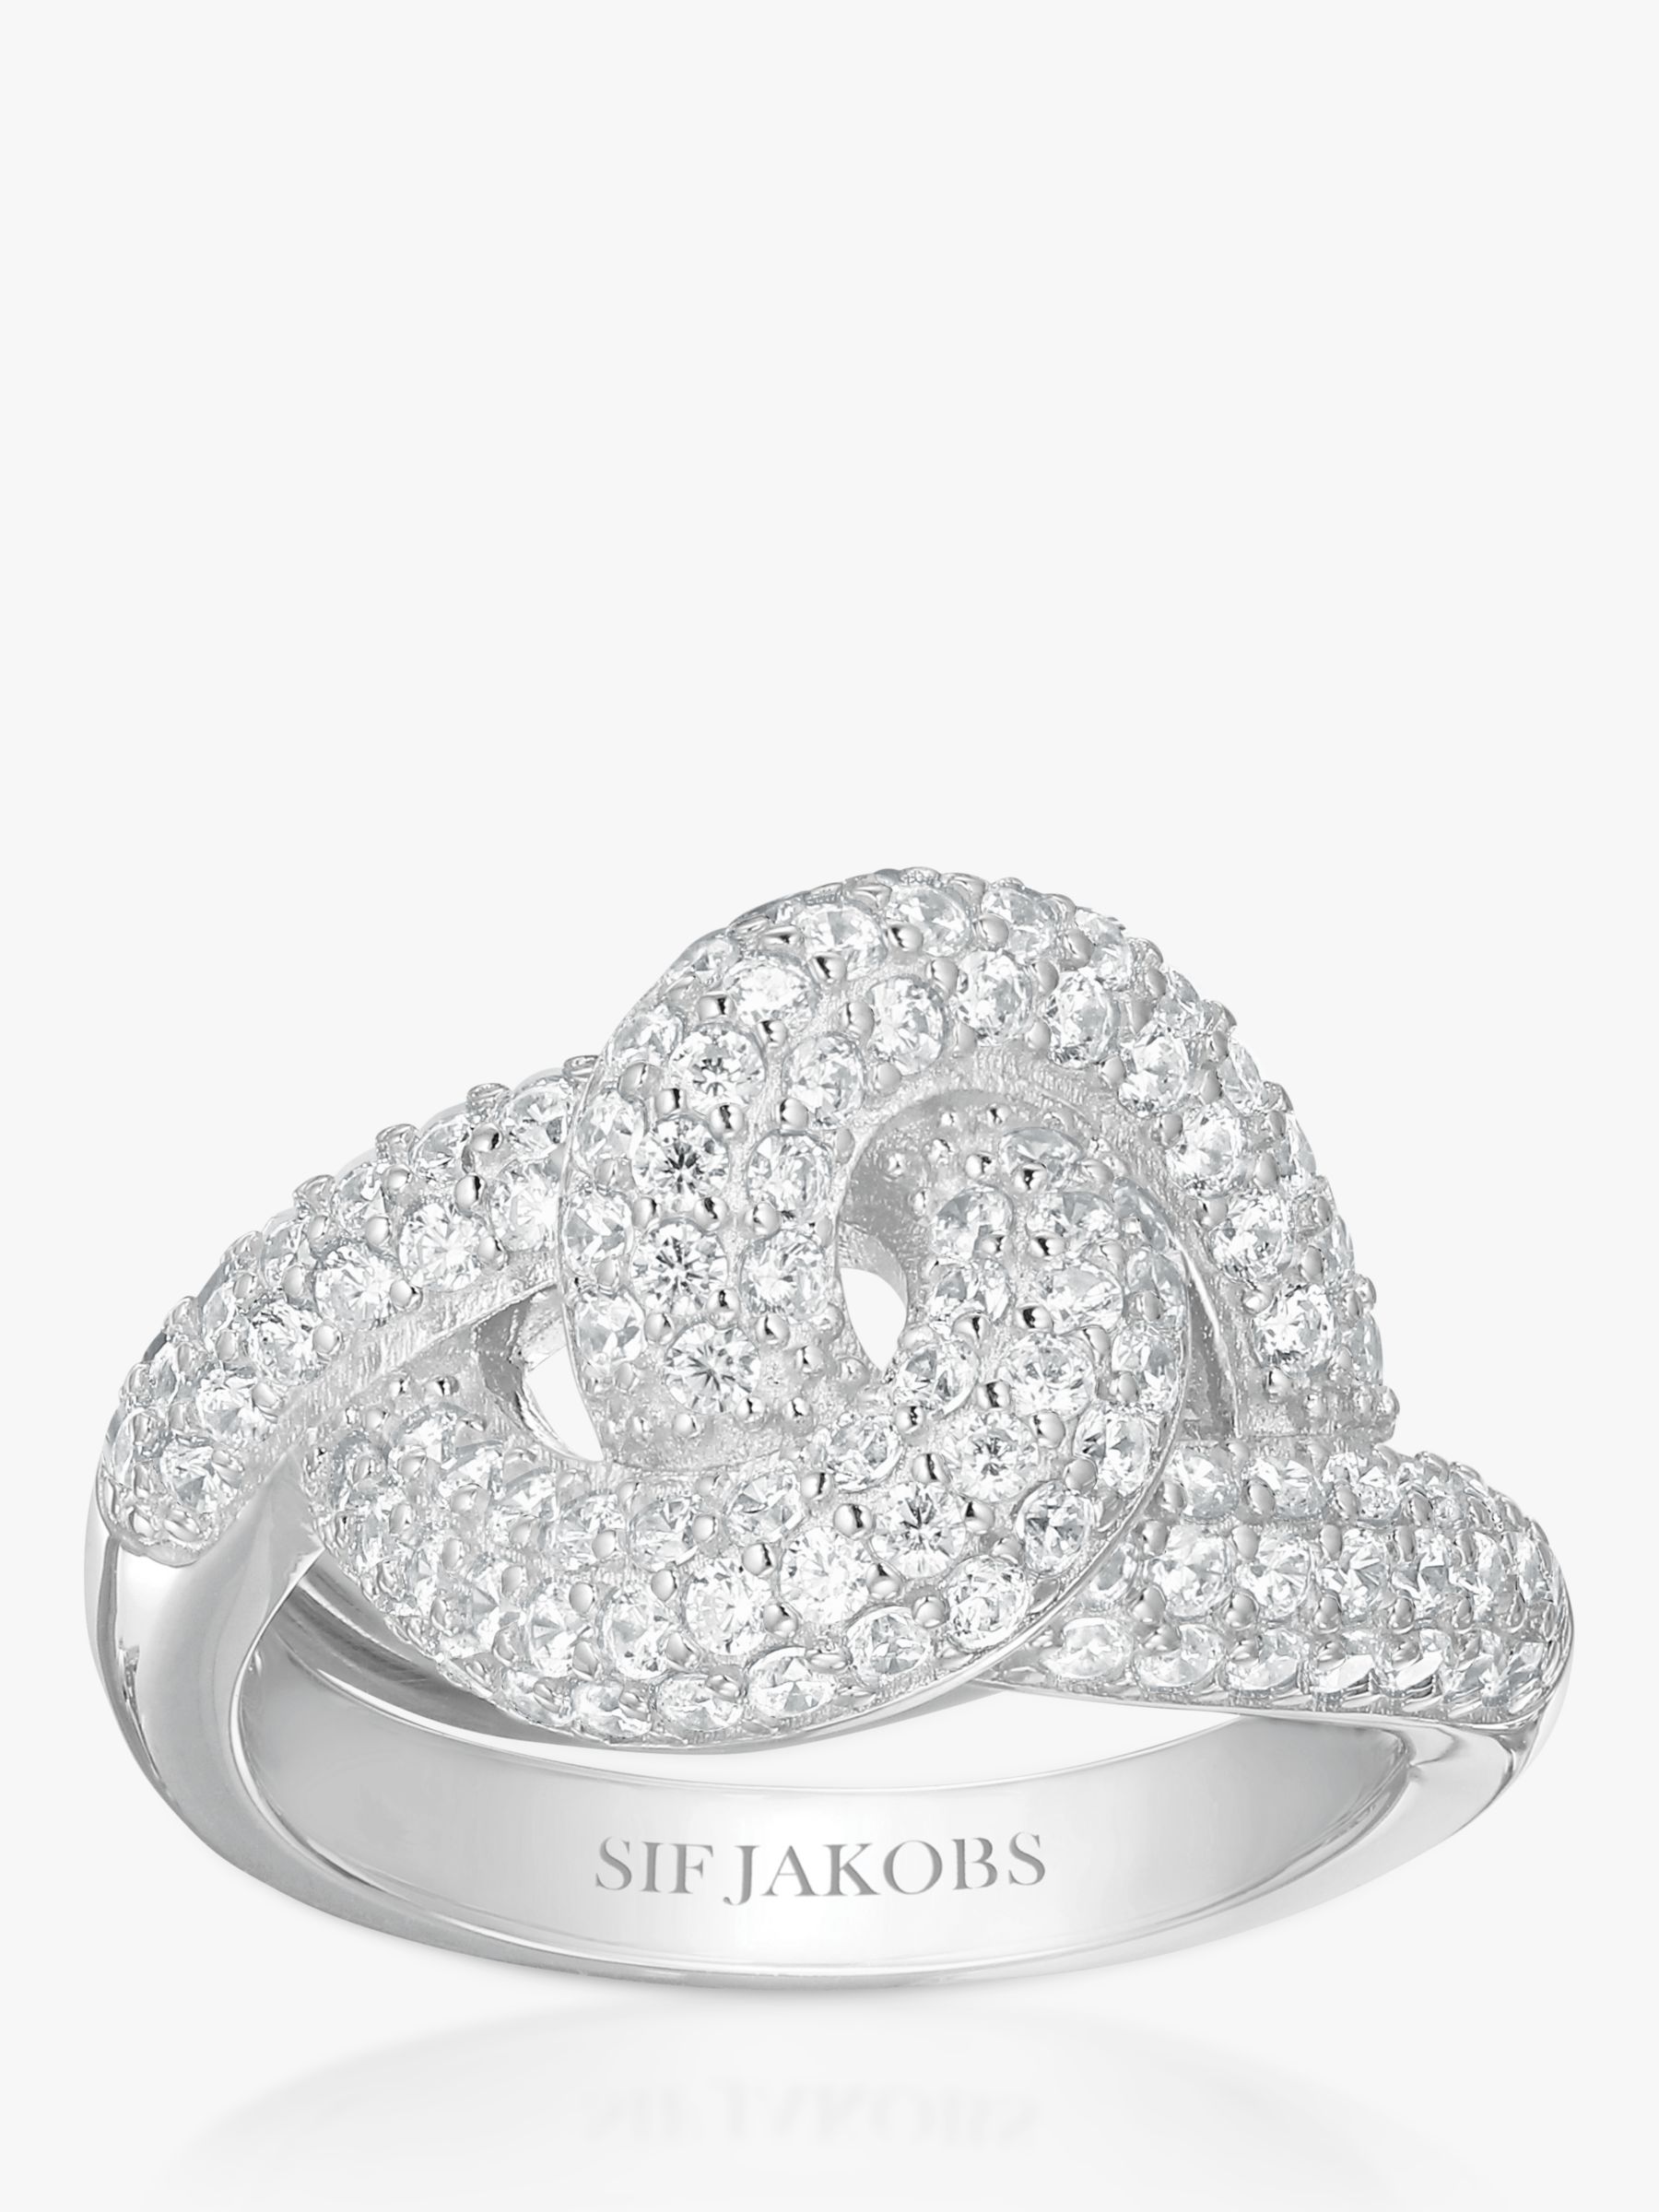 Buy Sif Jakobs Jewellery Cubic Zirconia Knot Ring Online at johnlewis.com